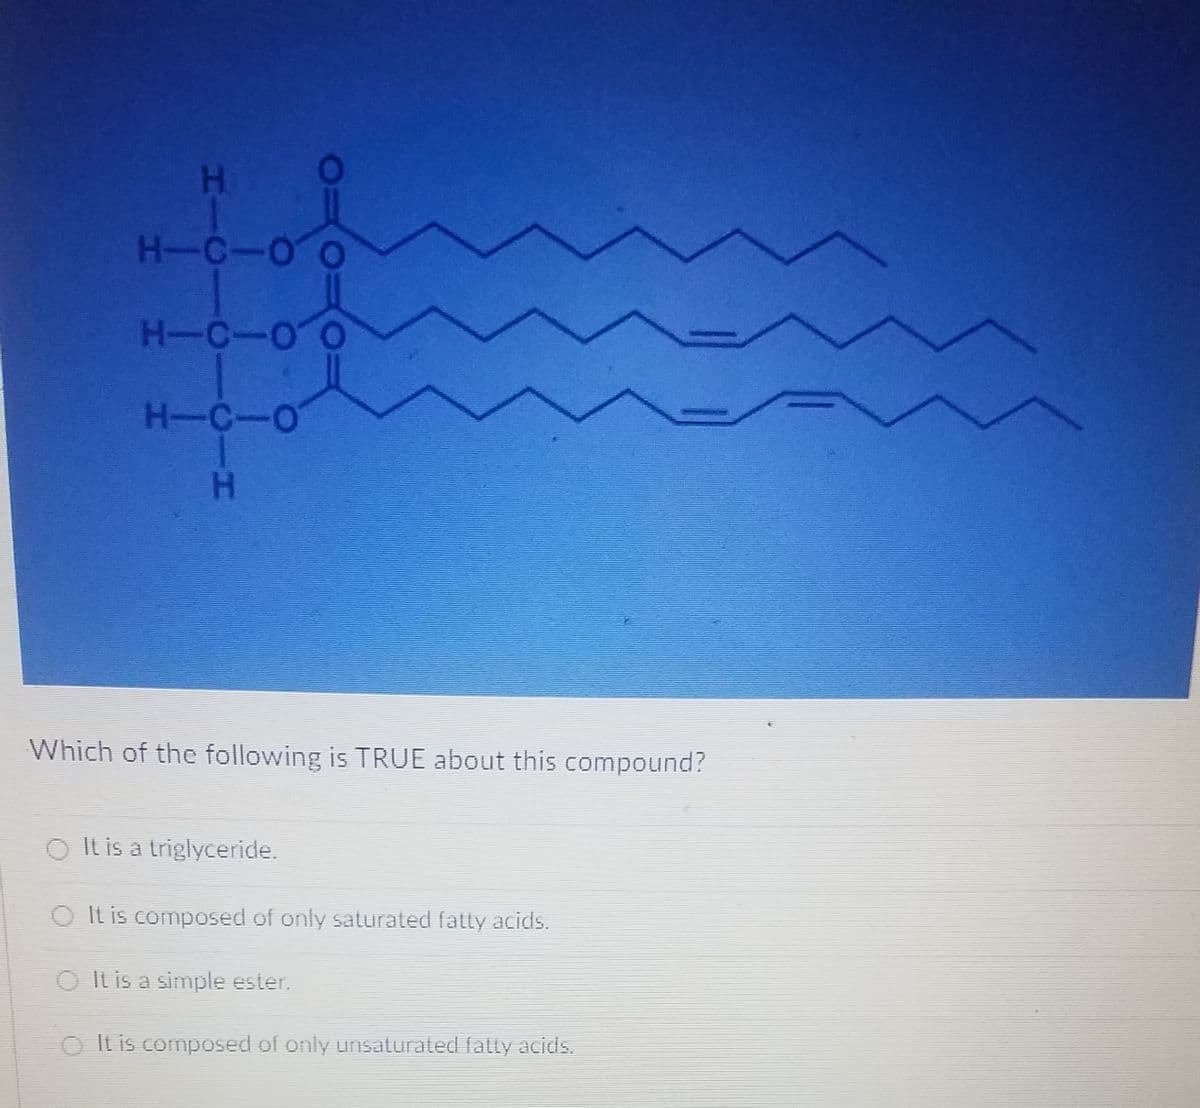 H-C-O
H-C-O
H-C-O
Which of the following is TRUE about this compound?
O It is a triglyceride.
O It is composed of only saturated fatty acids.
O It is a simple ester.
O It is composed of only unsaturated fatly acids.
PIC
